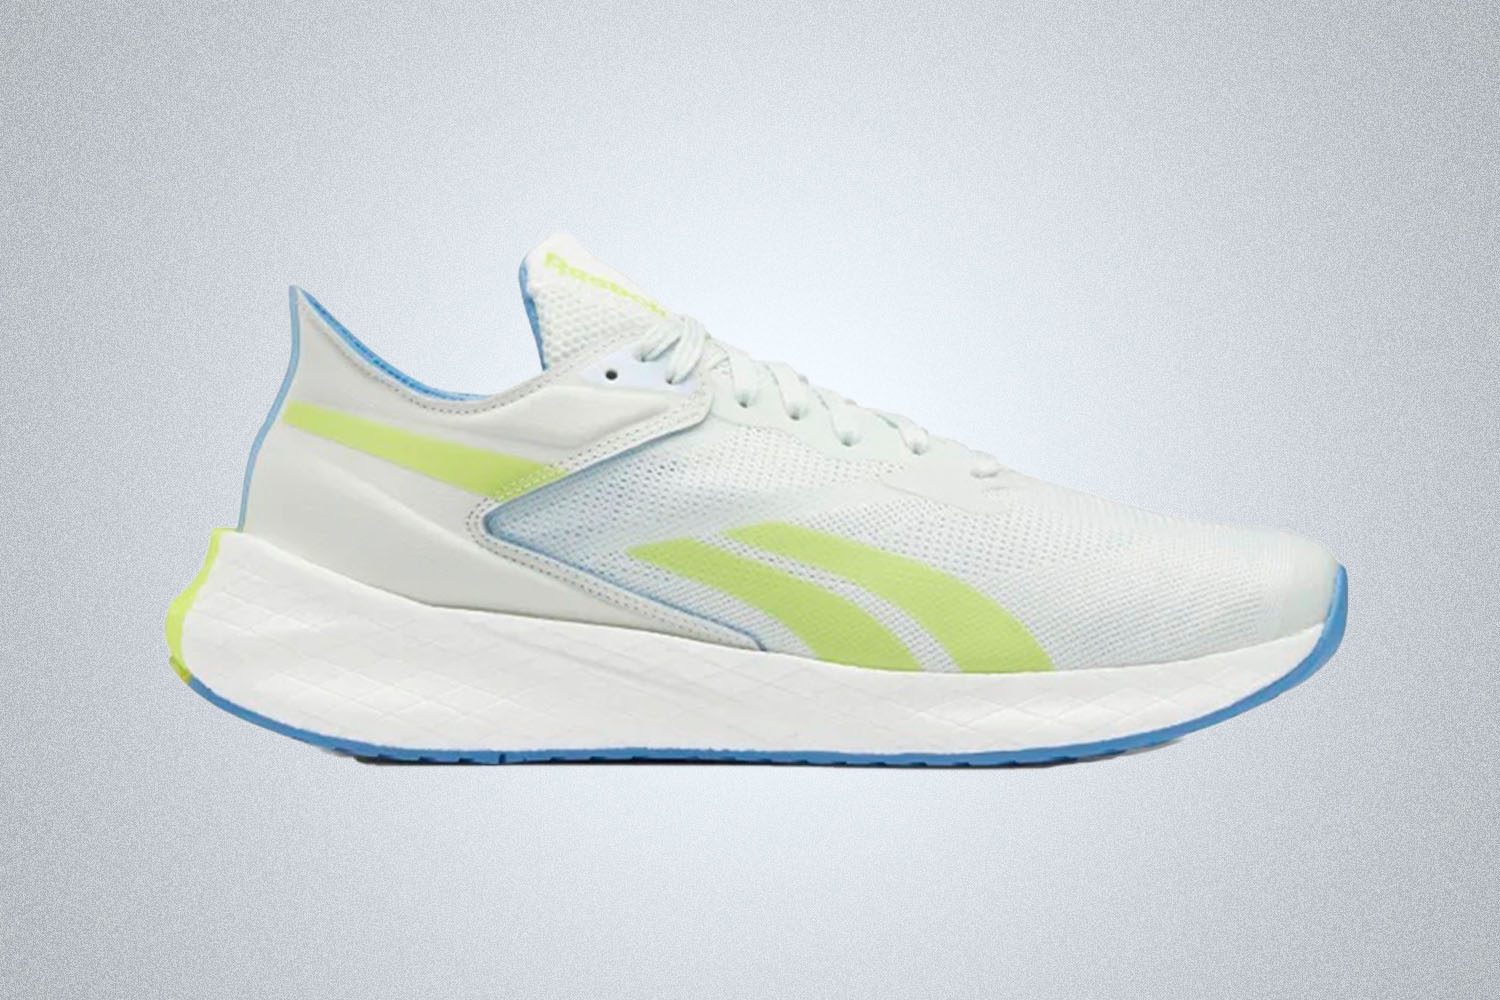 A pair of white and green accented Reebok running shoes on a grey background